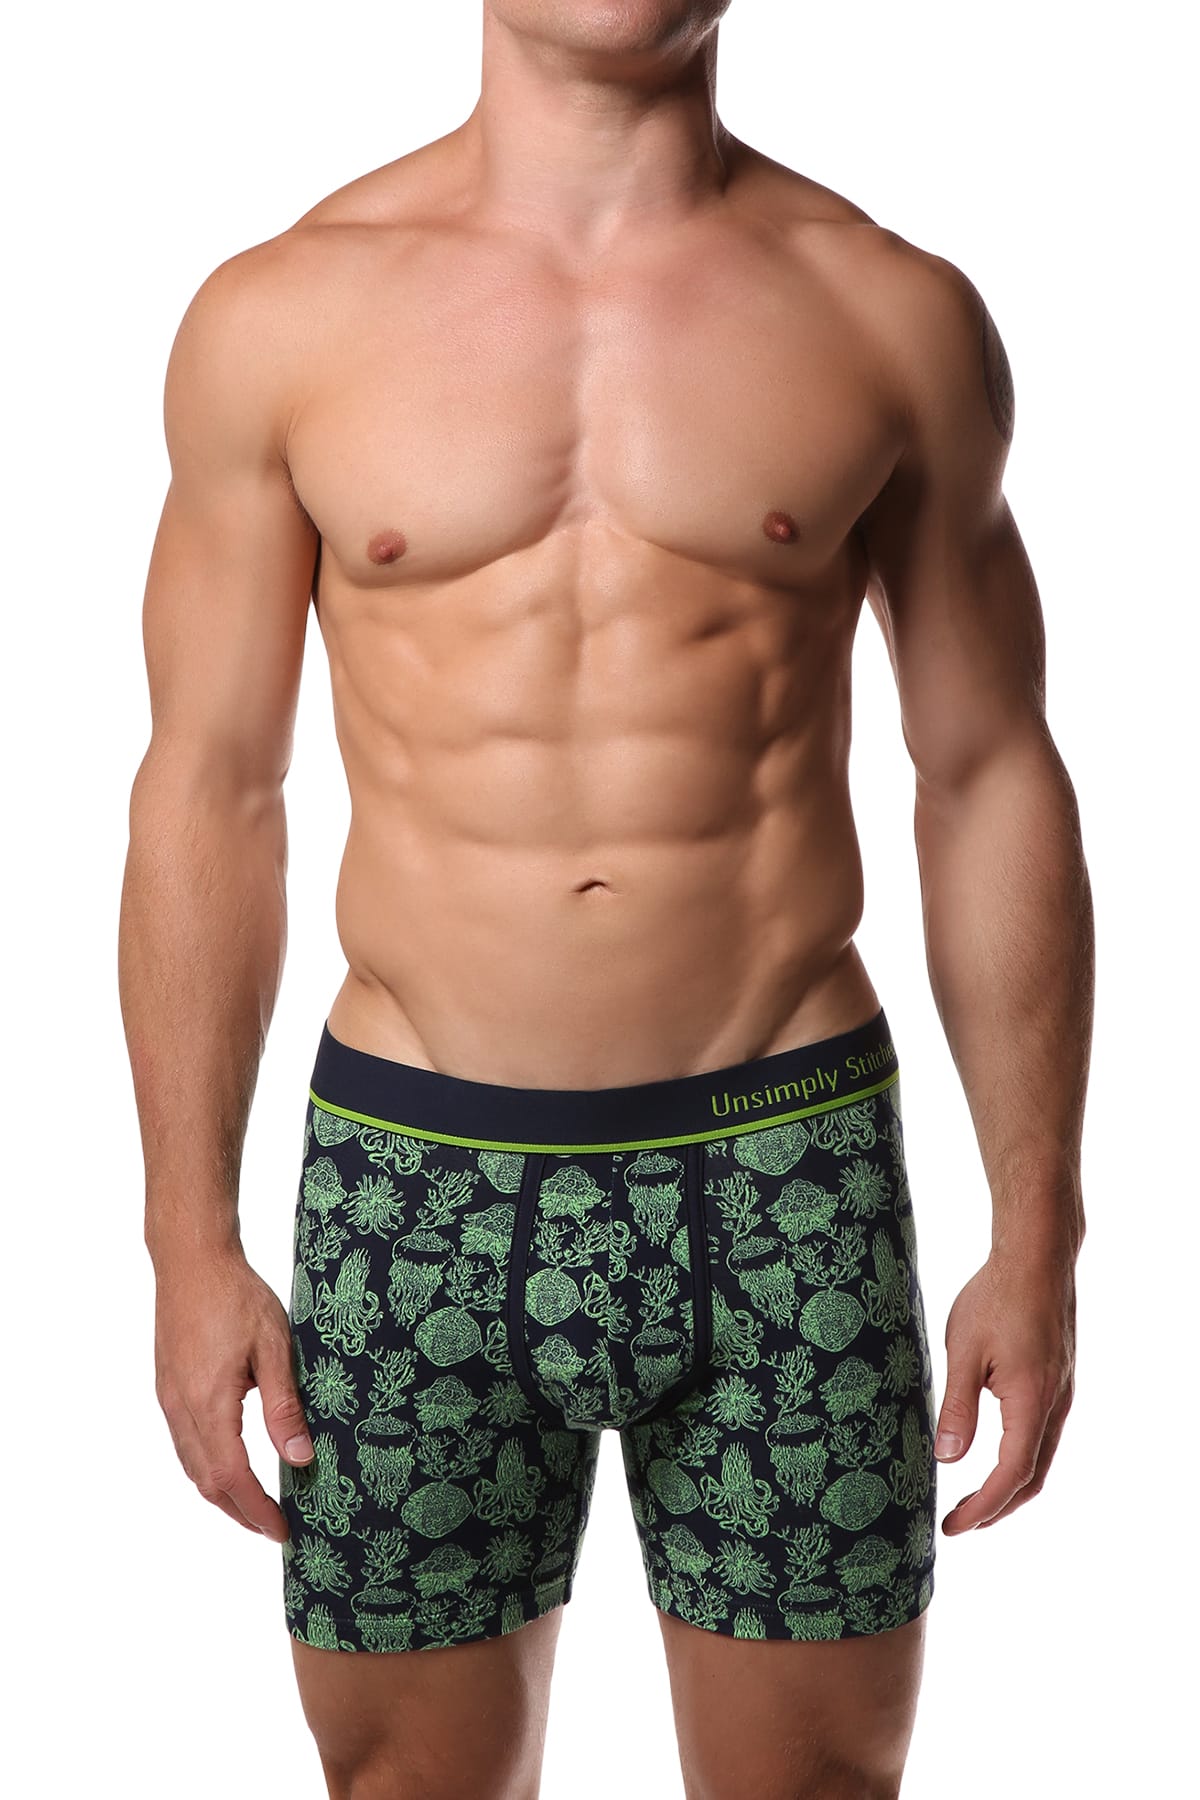 Unsimply Stitched Reef Boxer Brief